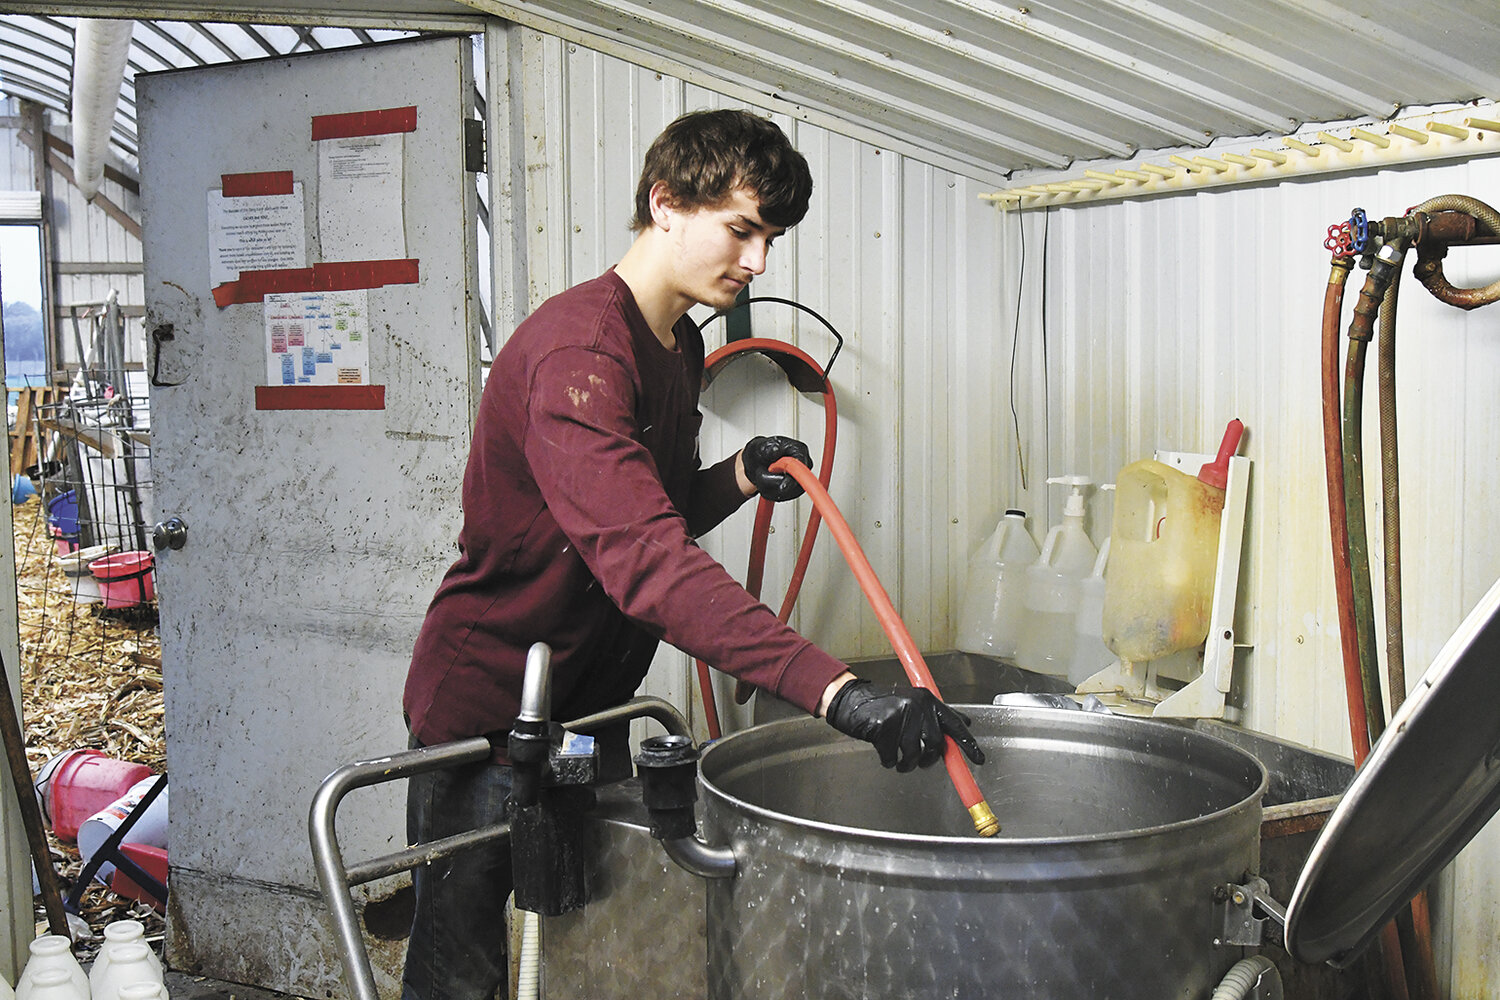 Brodee Naatz sprays out the portable milk dispenser Oct. 19 at the Naatz family’s dairy farm near Mantorville, Minnesota. The Naatzes feed their calves with bottles until weaning.